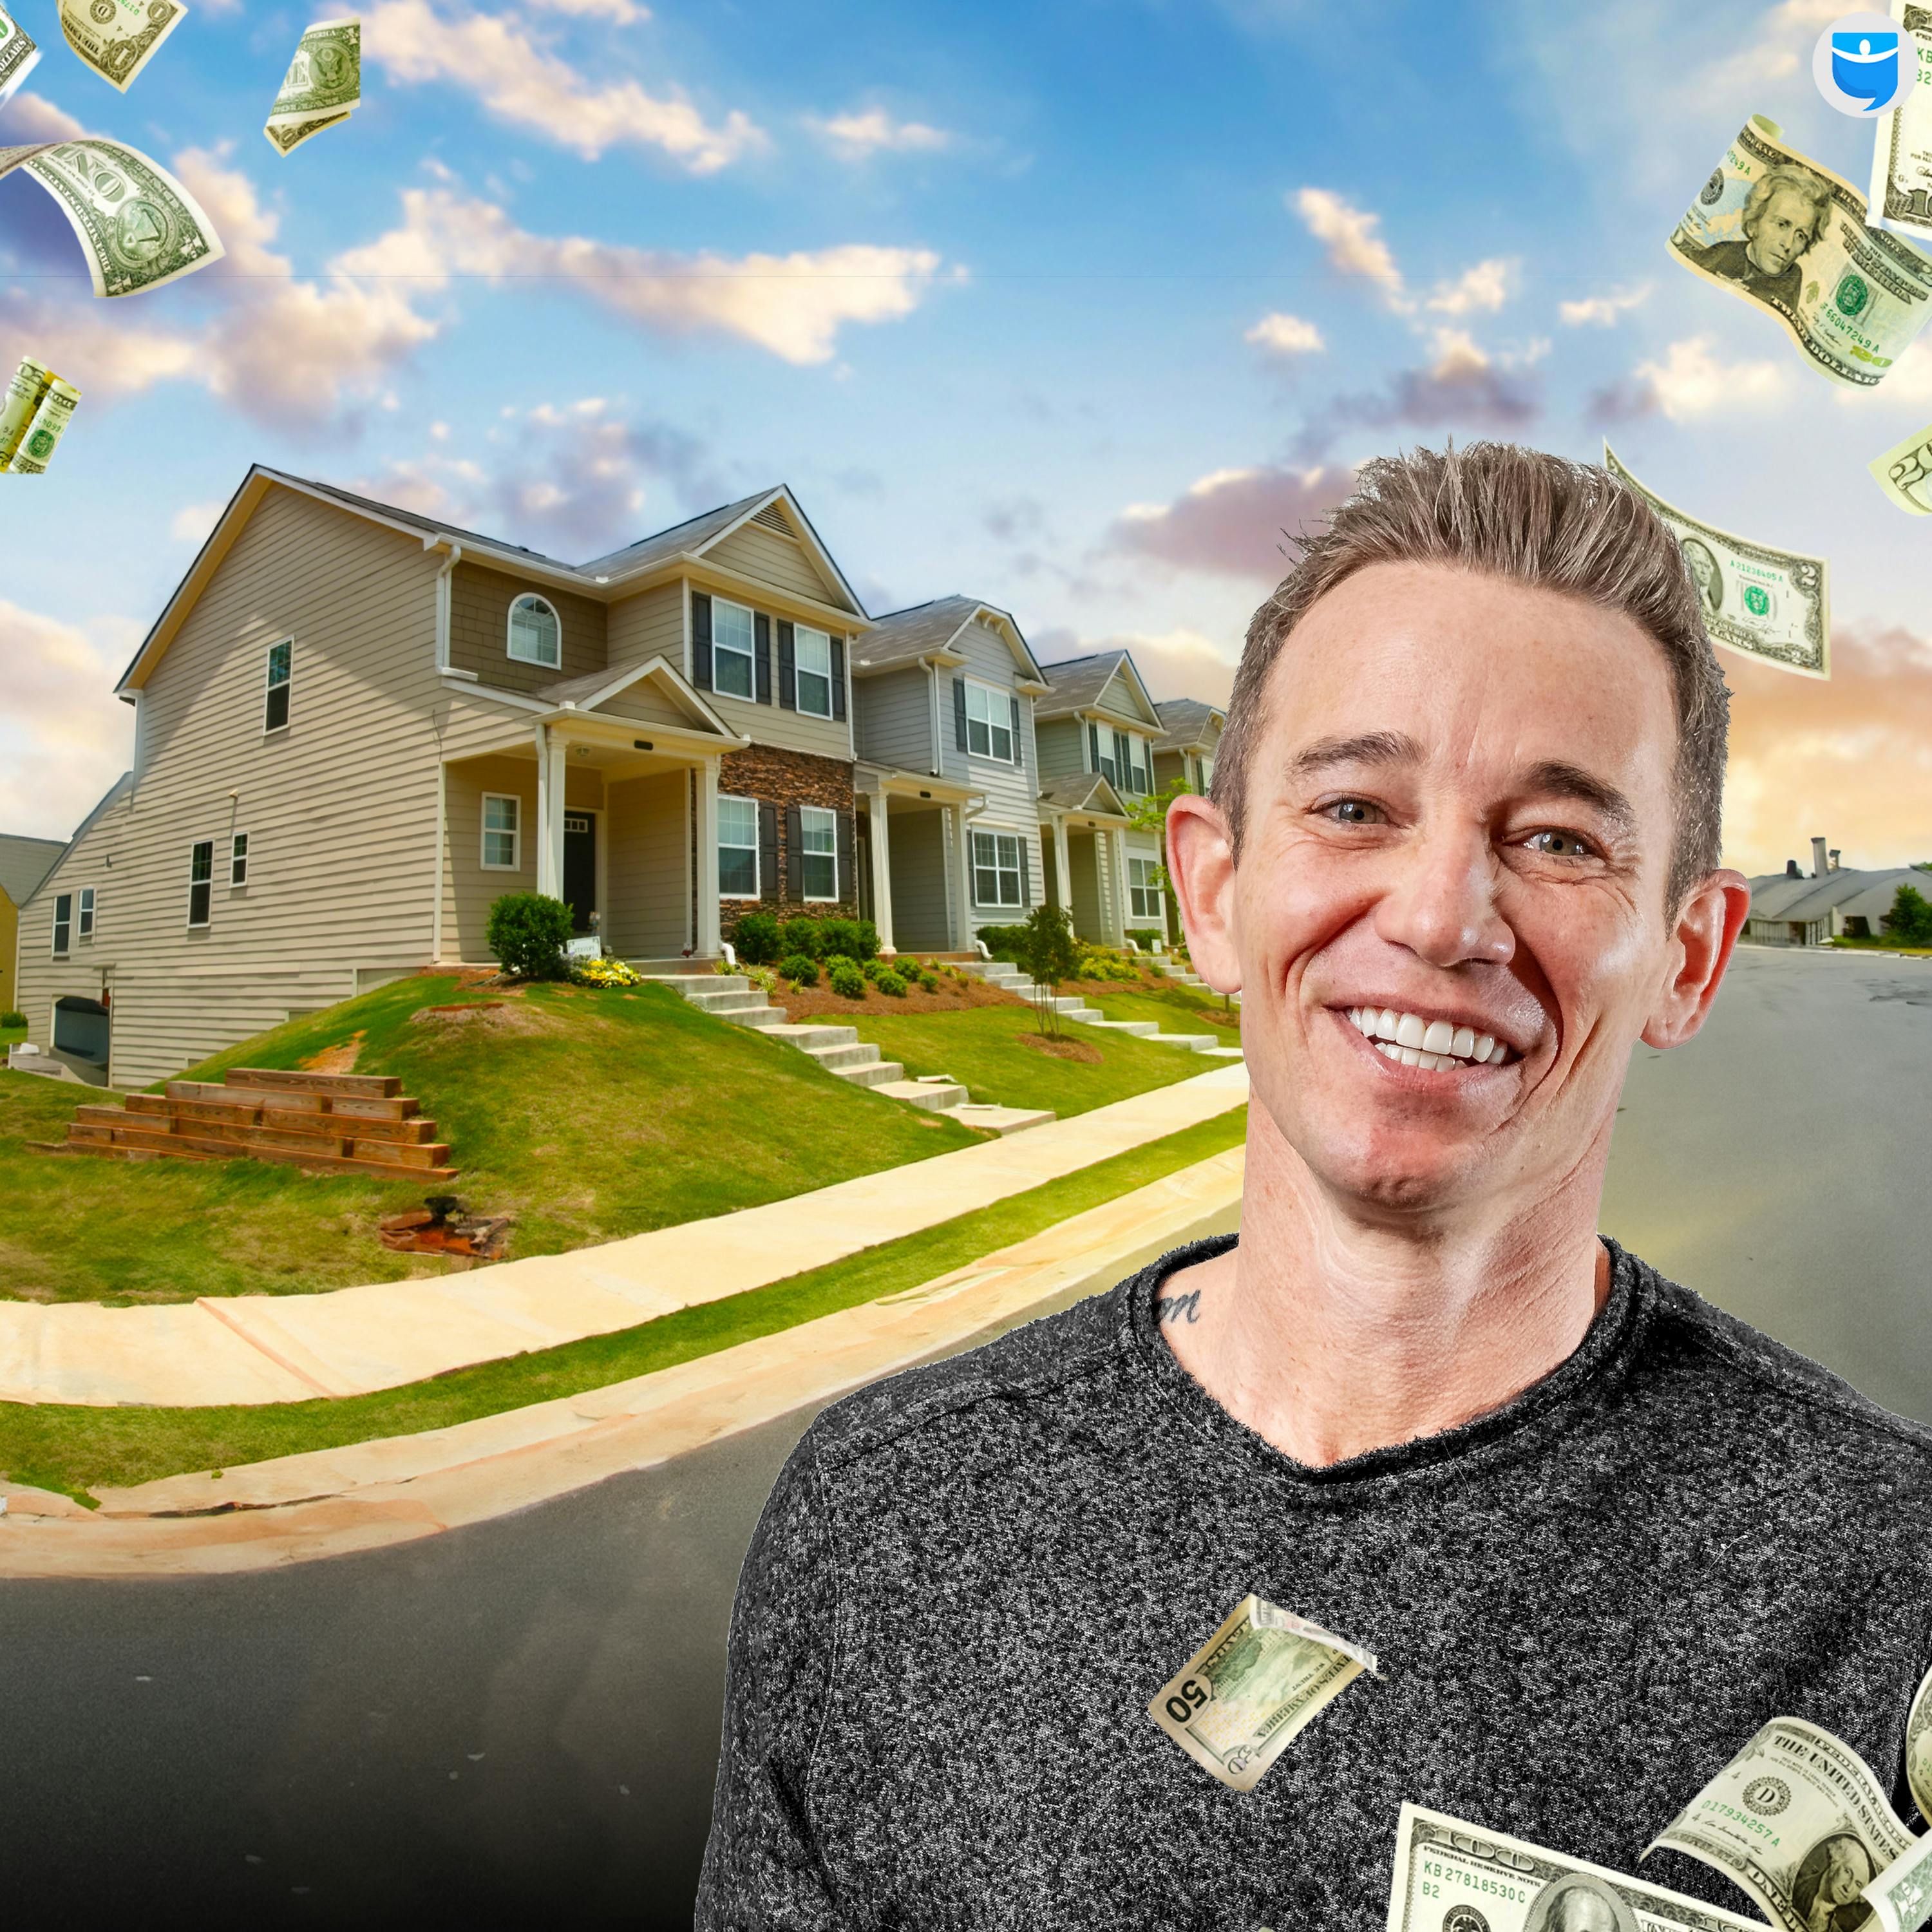 387: The Step-by-Step Guide to Flipping Houses and High-ROI Home Renovations w/James Dainard